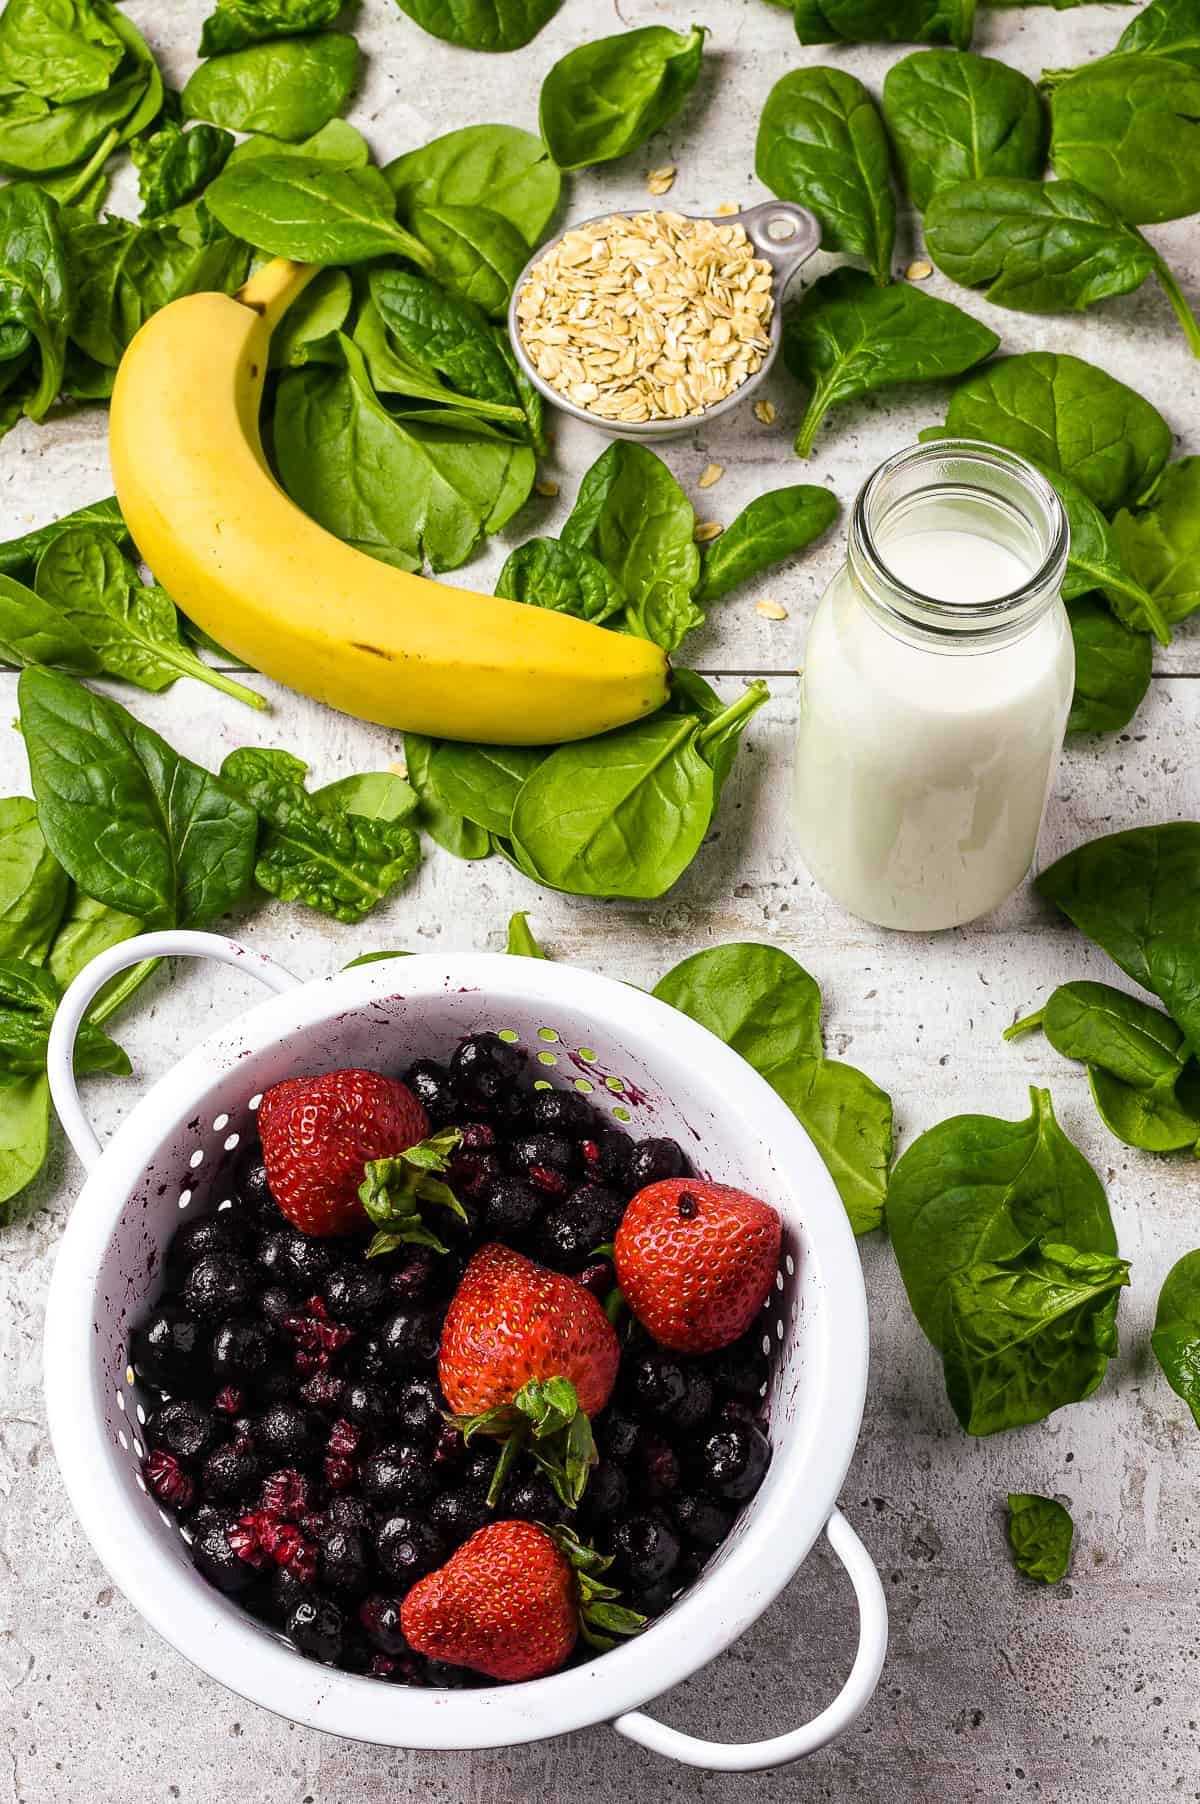 Berries, banana, almond milk, oats on bed of spinach.